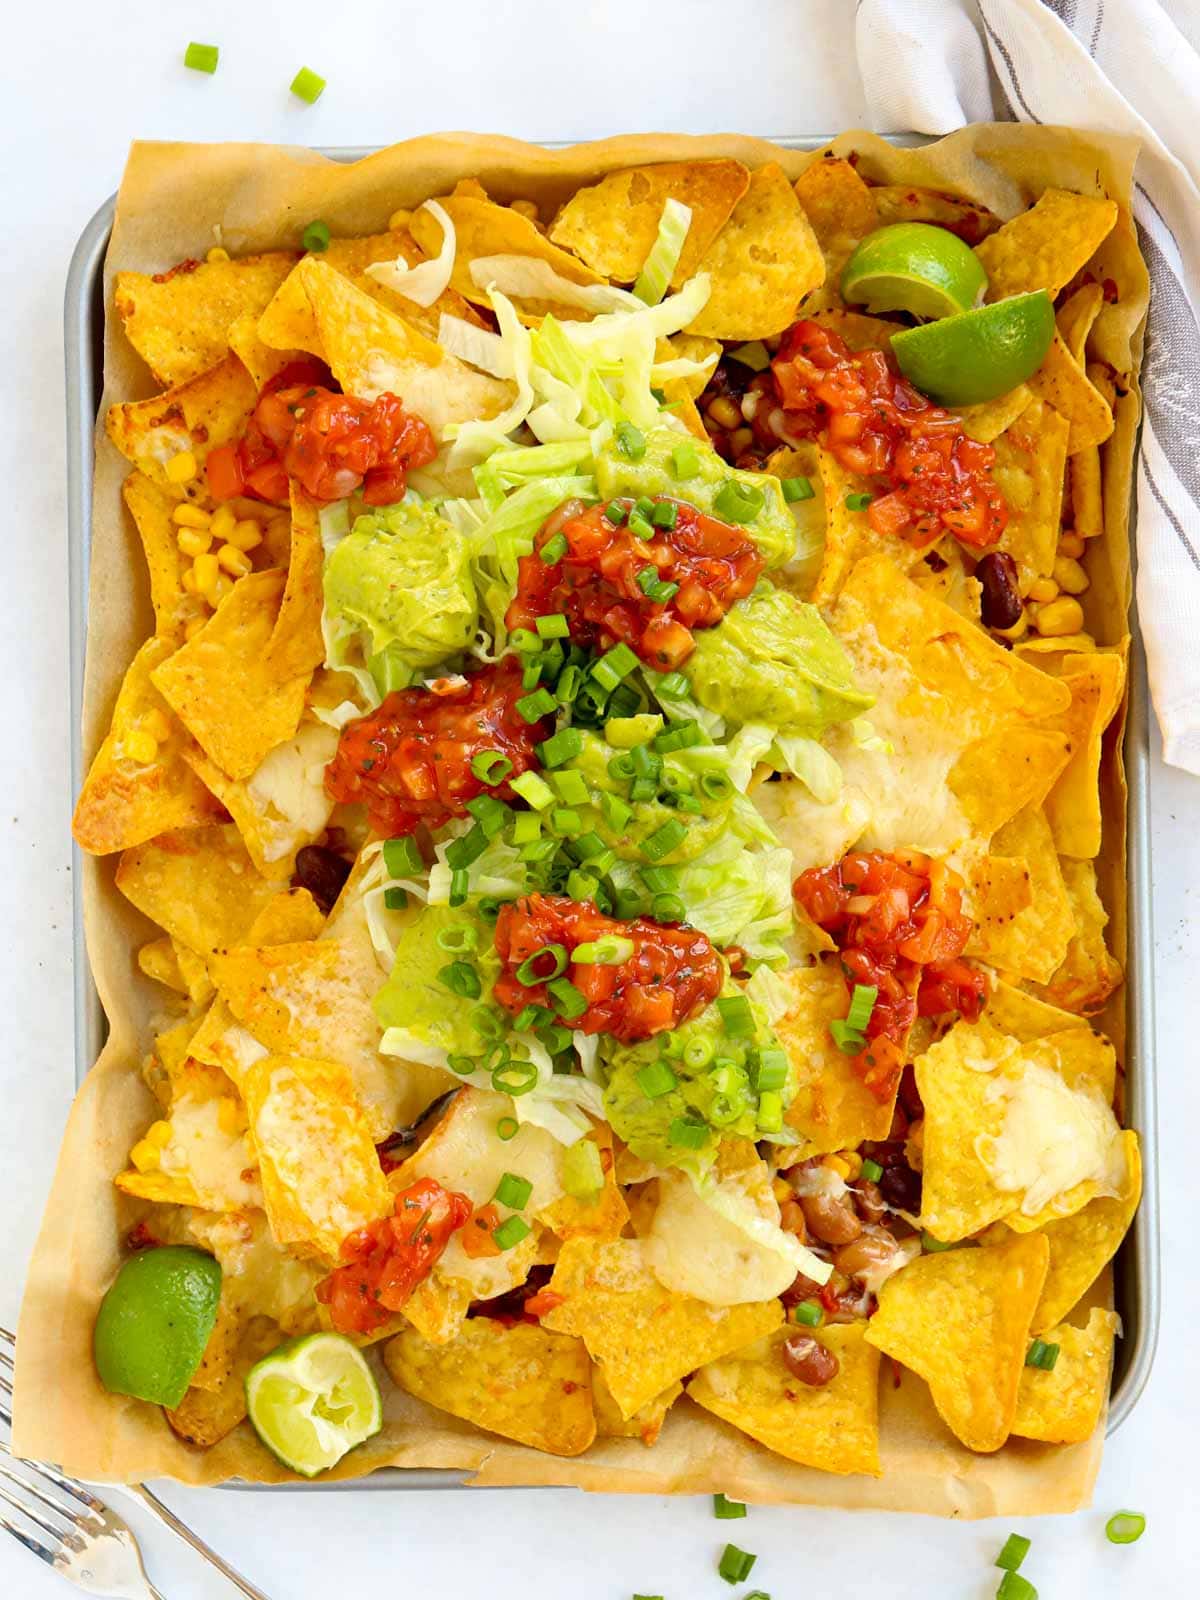 cheat's loaded nacho recipe that's ready in 10 minutes